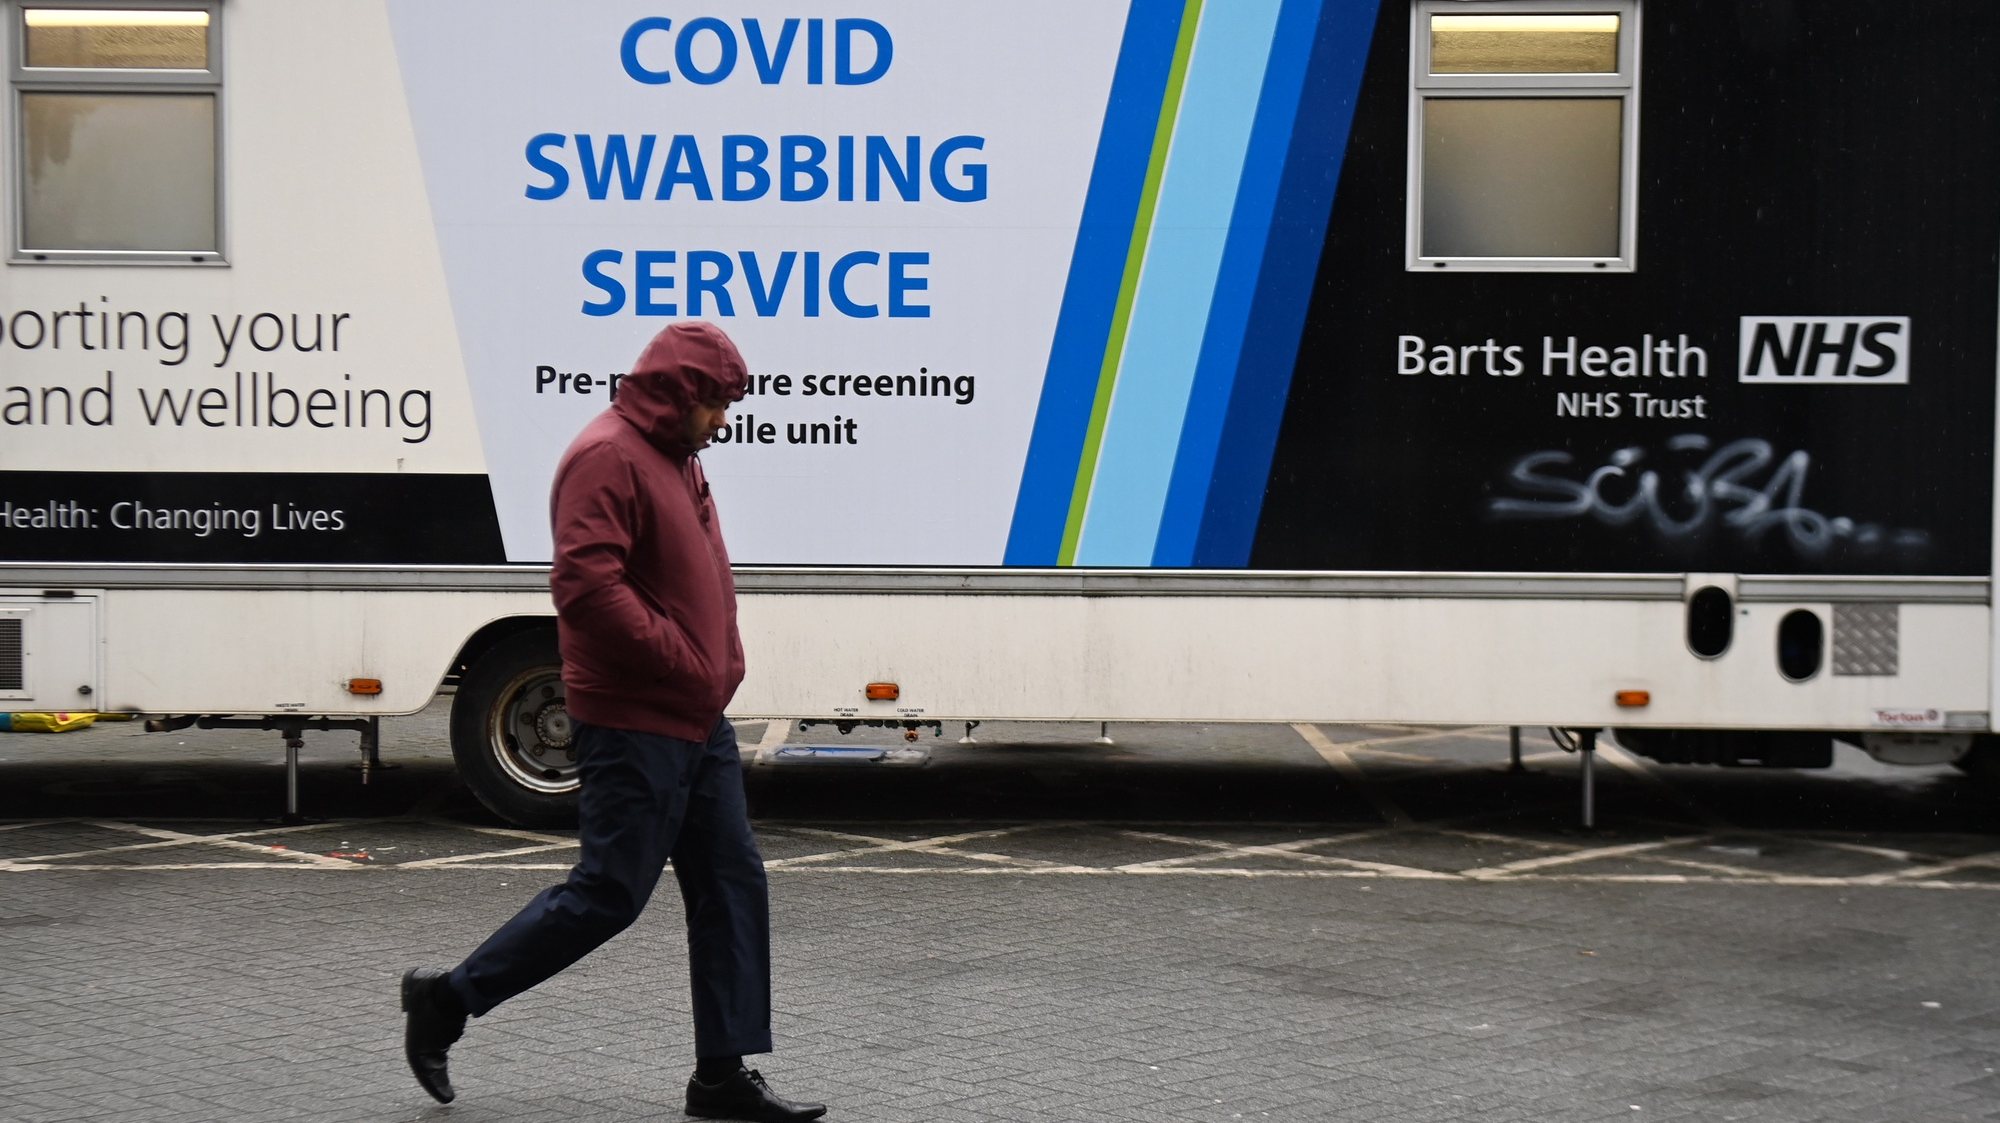 epa09021521 A pedestrian walks past a mobile Covid-19 test centre in London, Britain, 18 February 2021. Hospital admissions and deaths from Covid-19 are dropping significantly, according to reports. The UK government is hopeful that schools can reopen in early March and that lockdown restrictions can start to be lifted.  EPA/ANDY RAIN